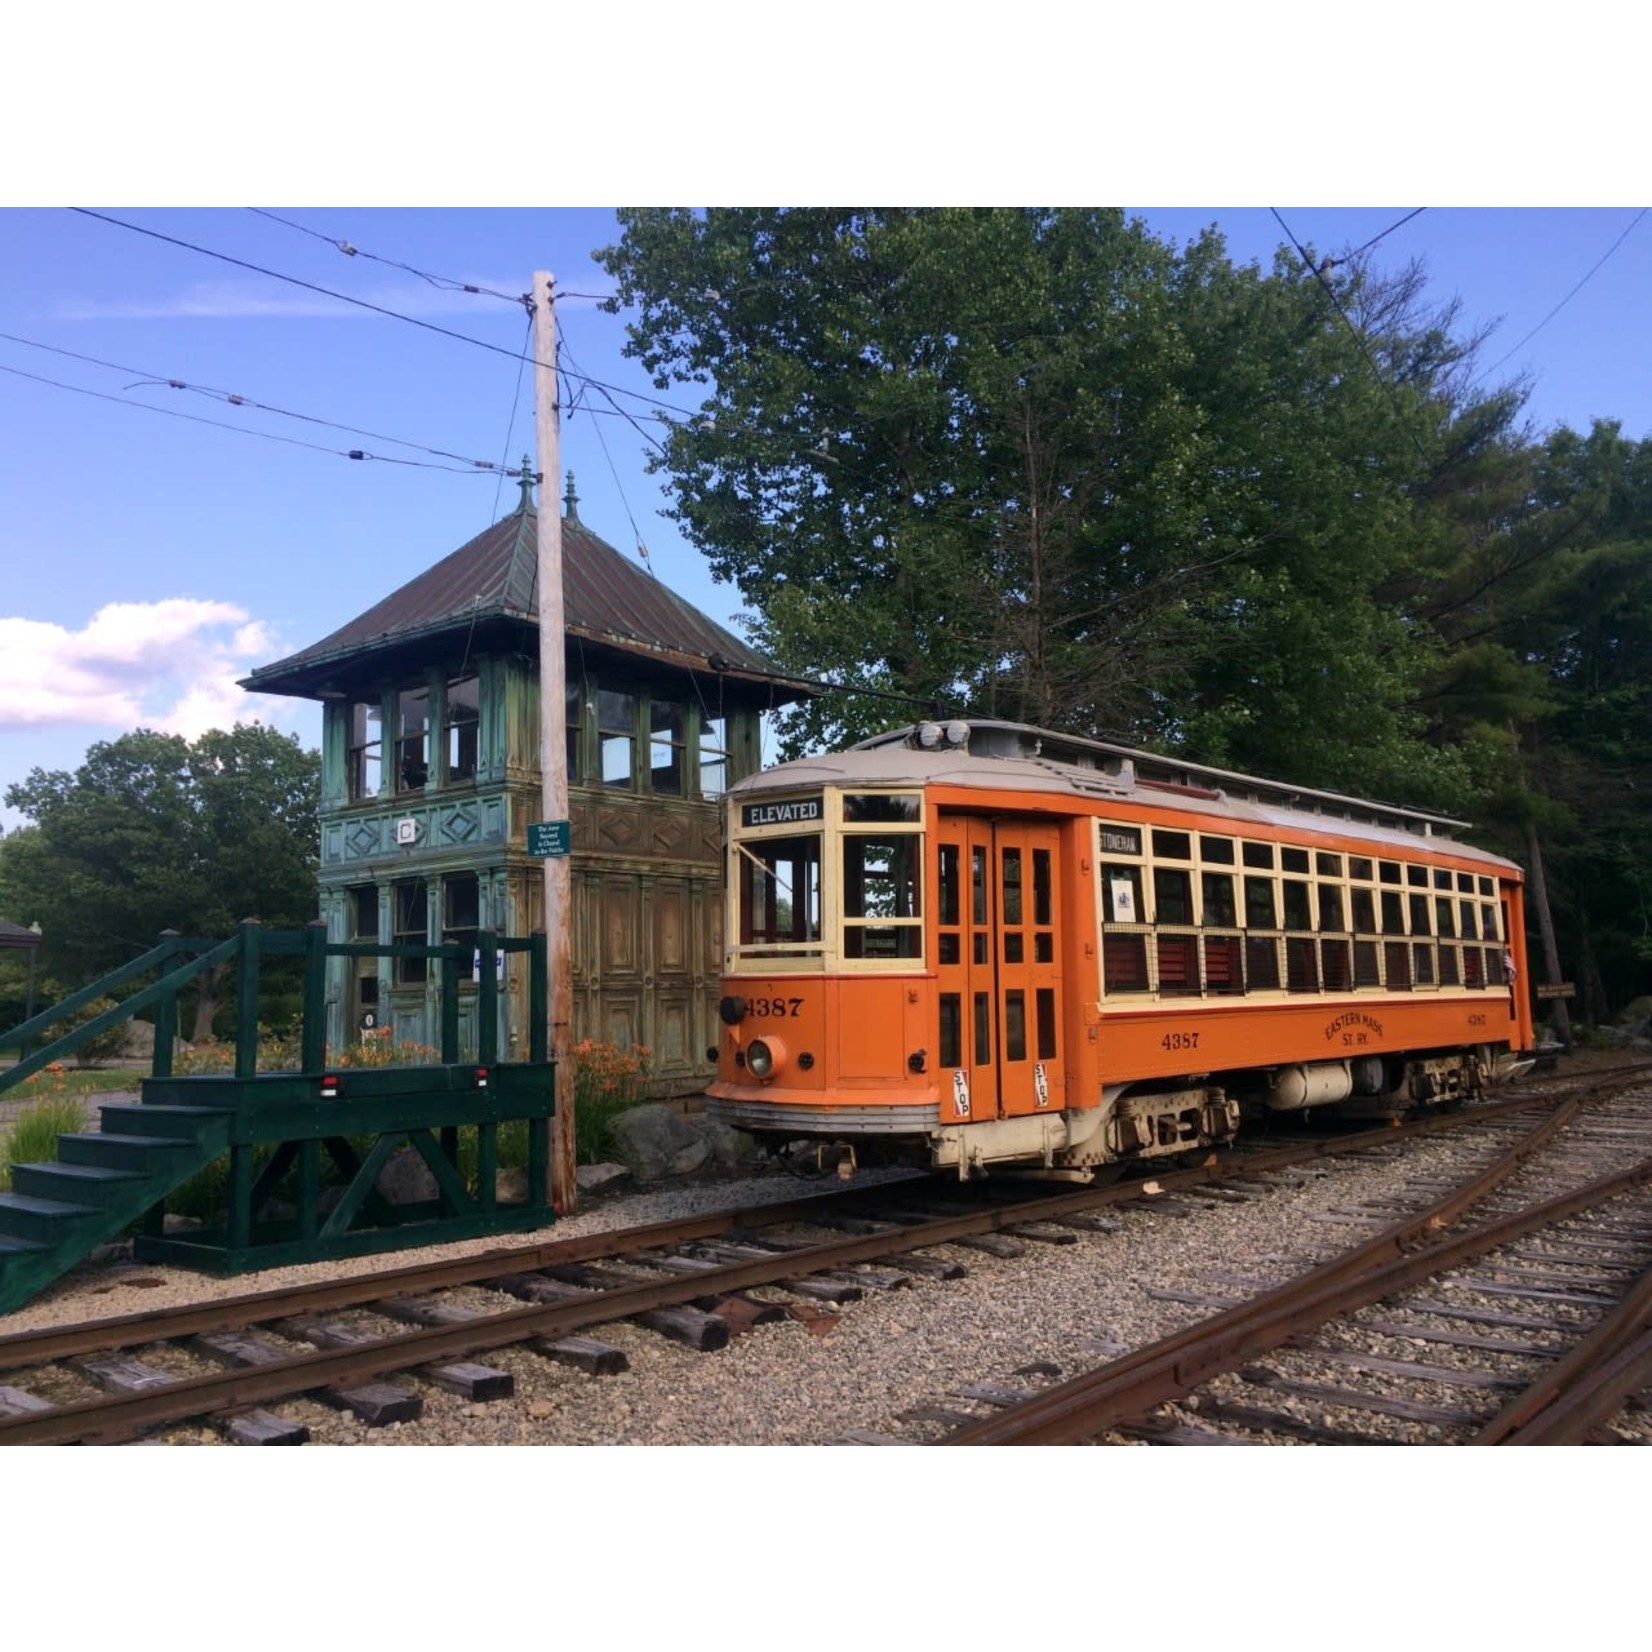 Pack of 8 Seashore Trolley Museum Note Cards (asst) with envelopes